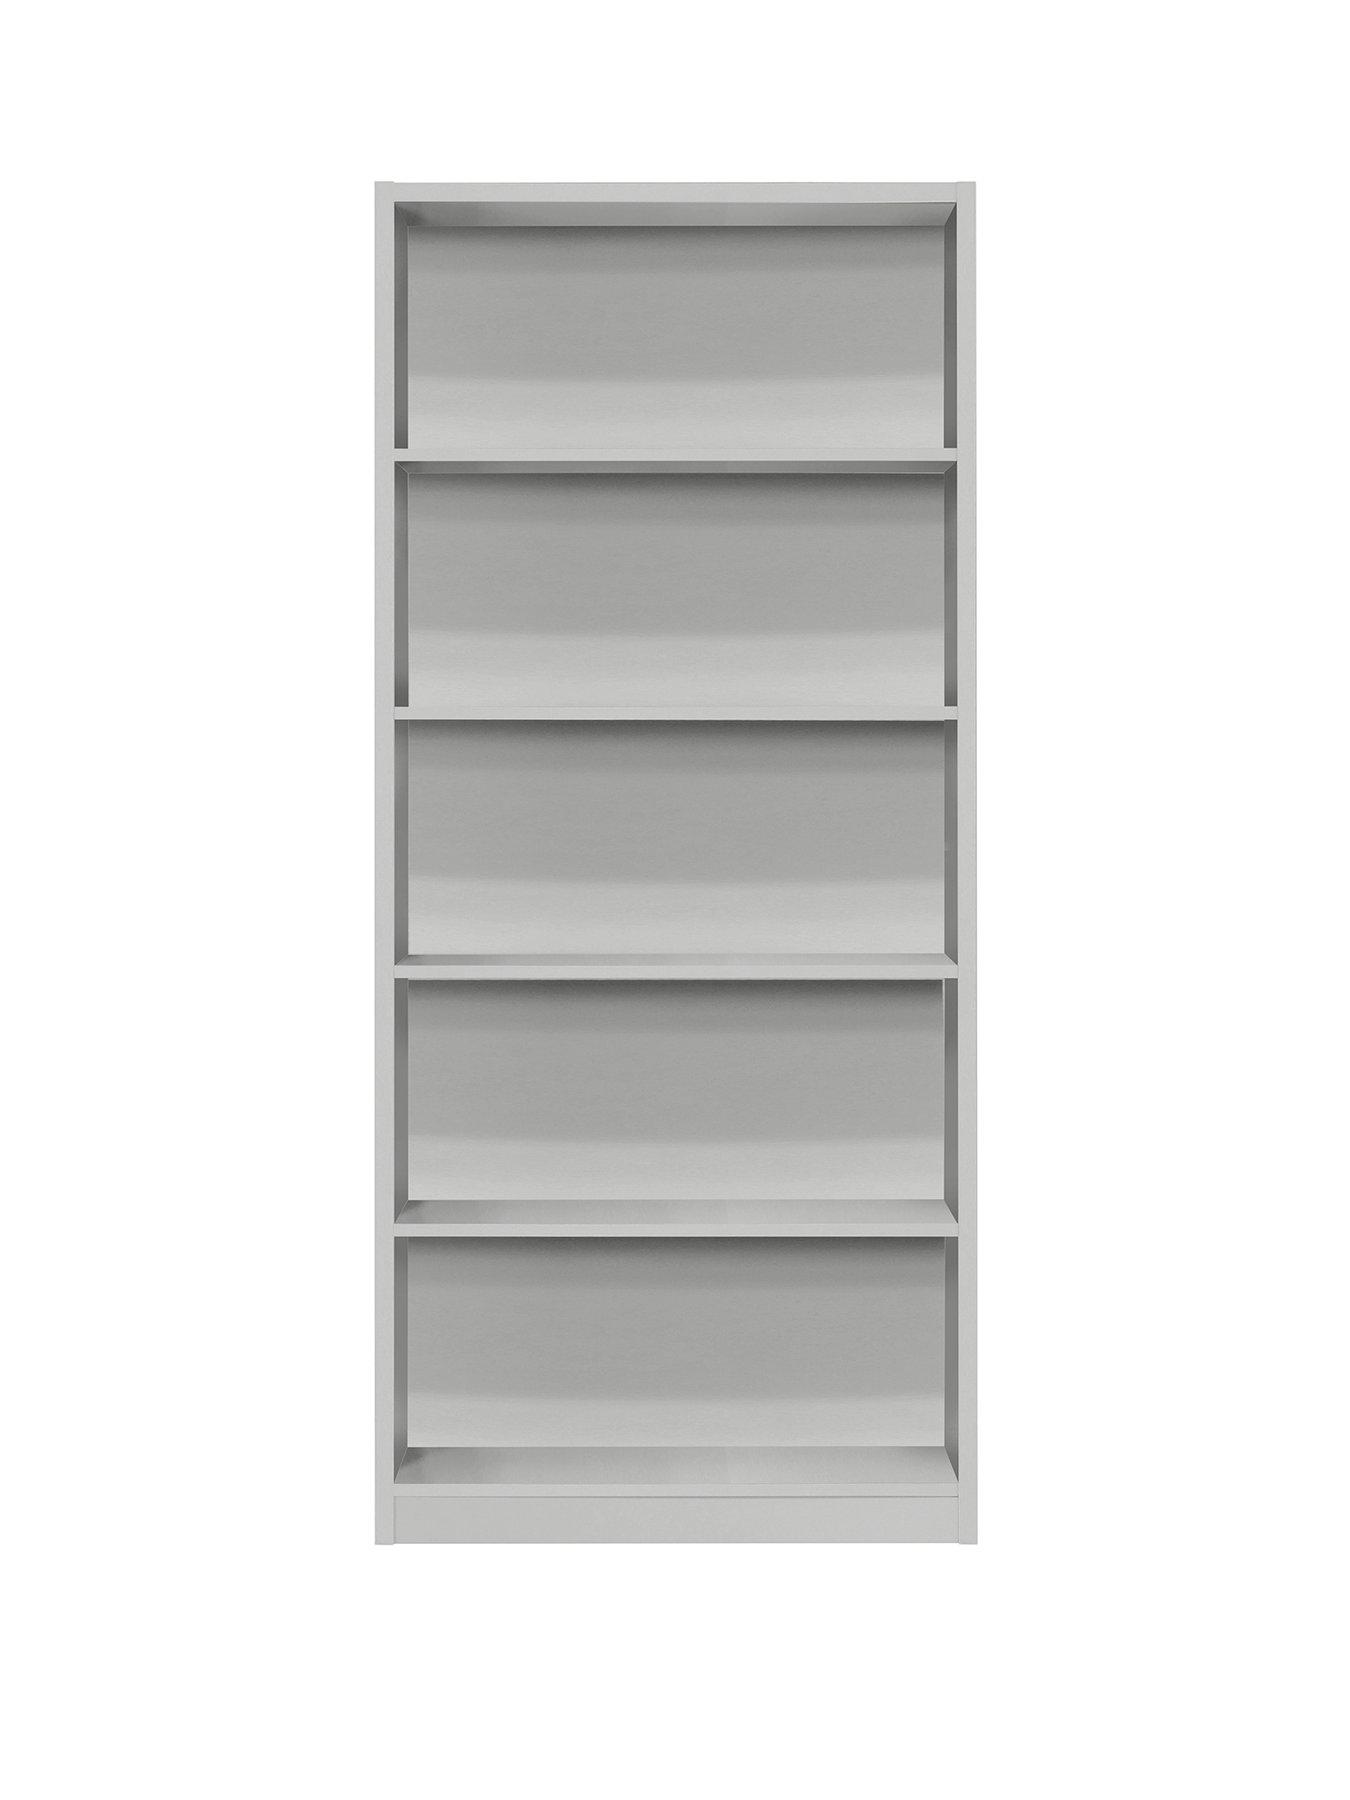 Metro Light Grey Picture Photo Frames in 39 sizes in stock Quality MDF Wood